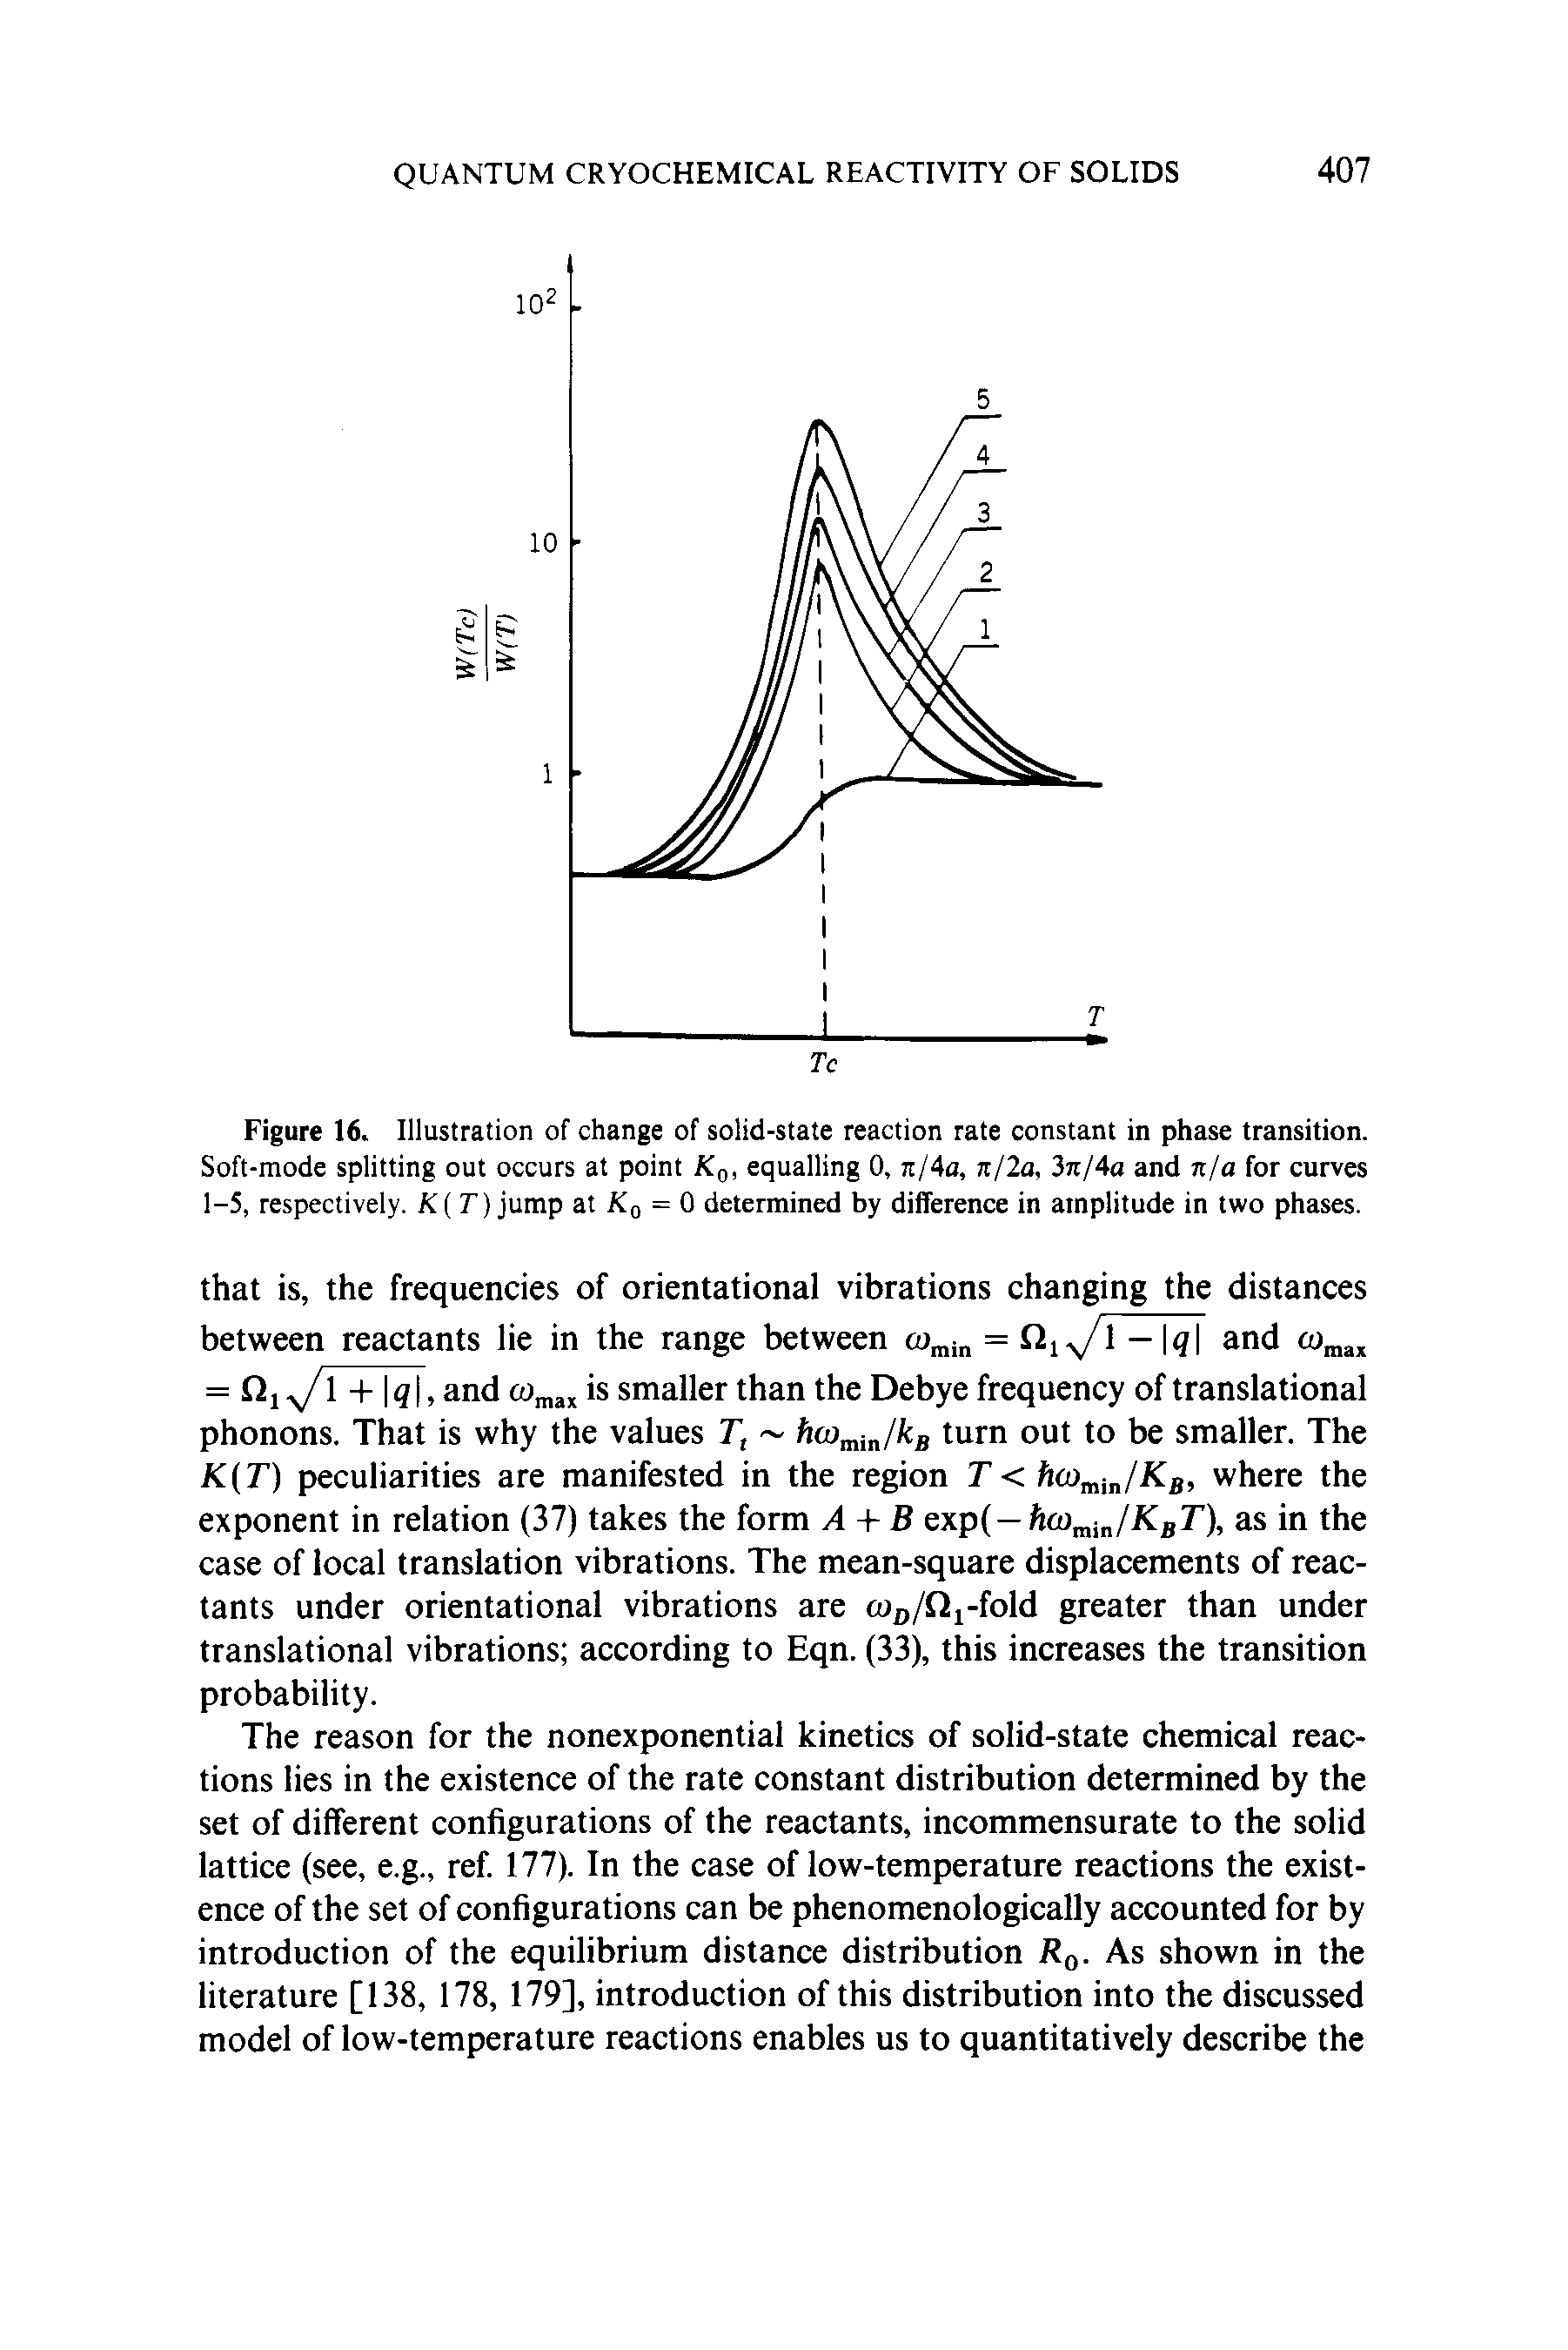 Figure 16. Illustration of change of solid-state reaction rate constant in phase transition. Soft-mode splitting out occurs at point equalling 0,7i/4a, njla, 3 t/4o and n/a for curves 1-5, respectively. K( T) jump at Kq = 0 determined by difference in amplitude in two phases.